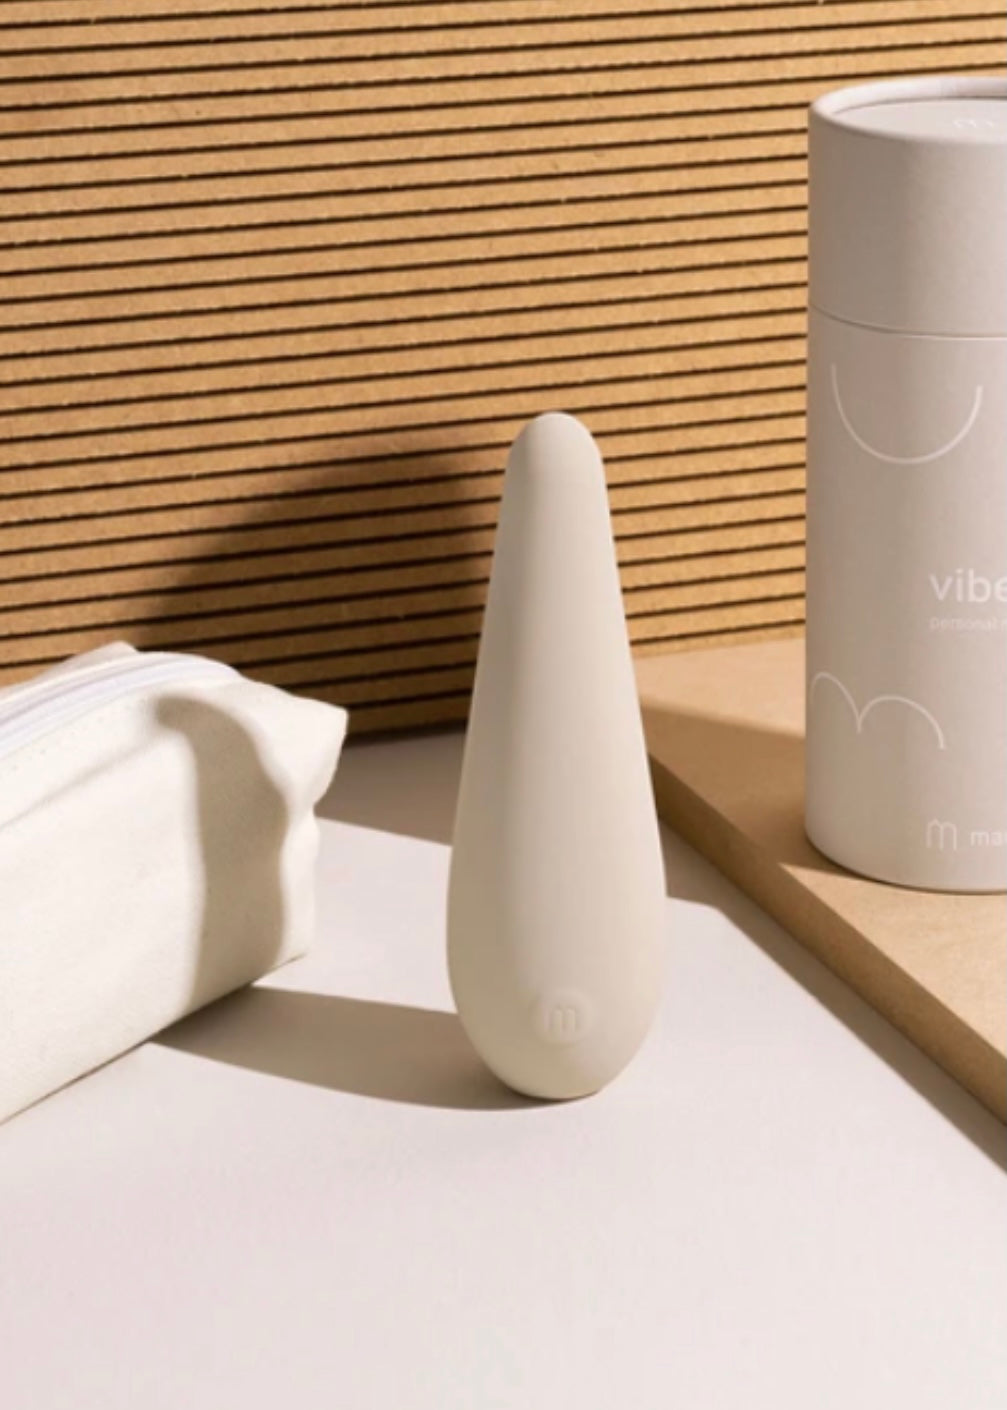 Personal Massager - The Vibe